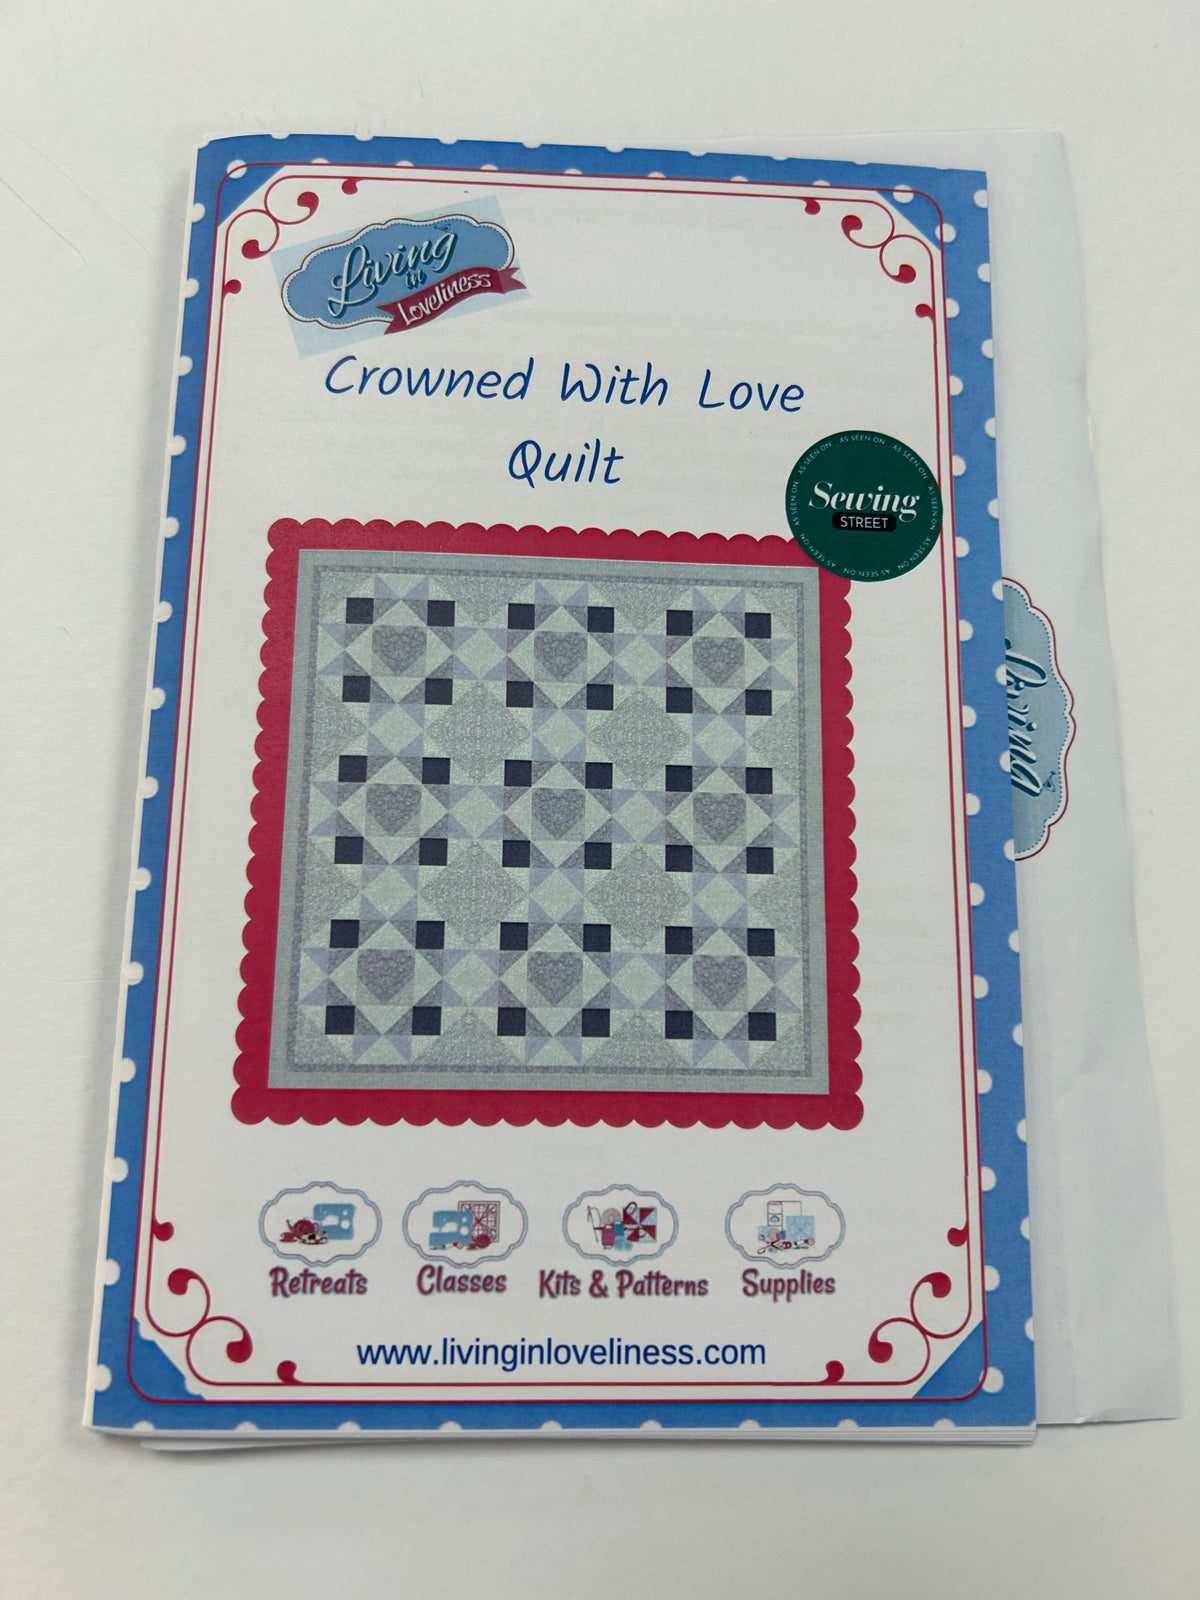 Living in Loveliness - Crowned with Love Quilt Pattern